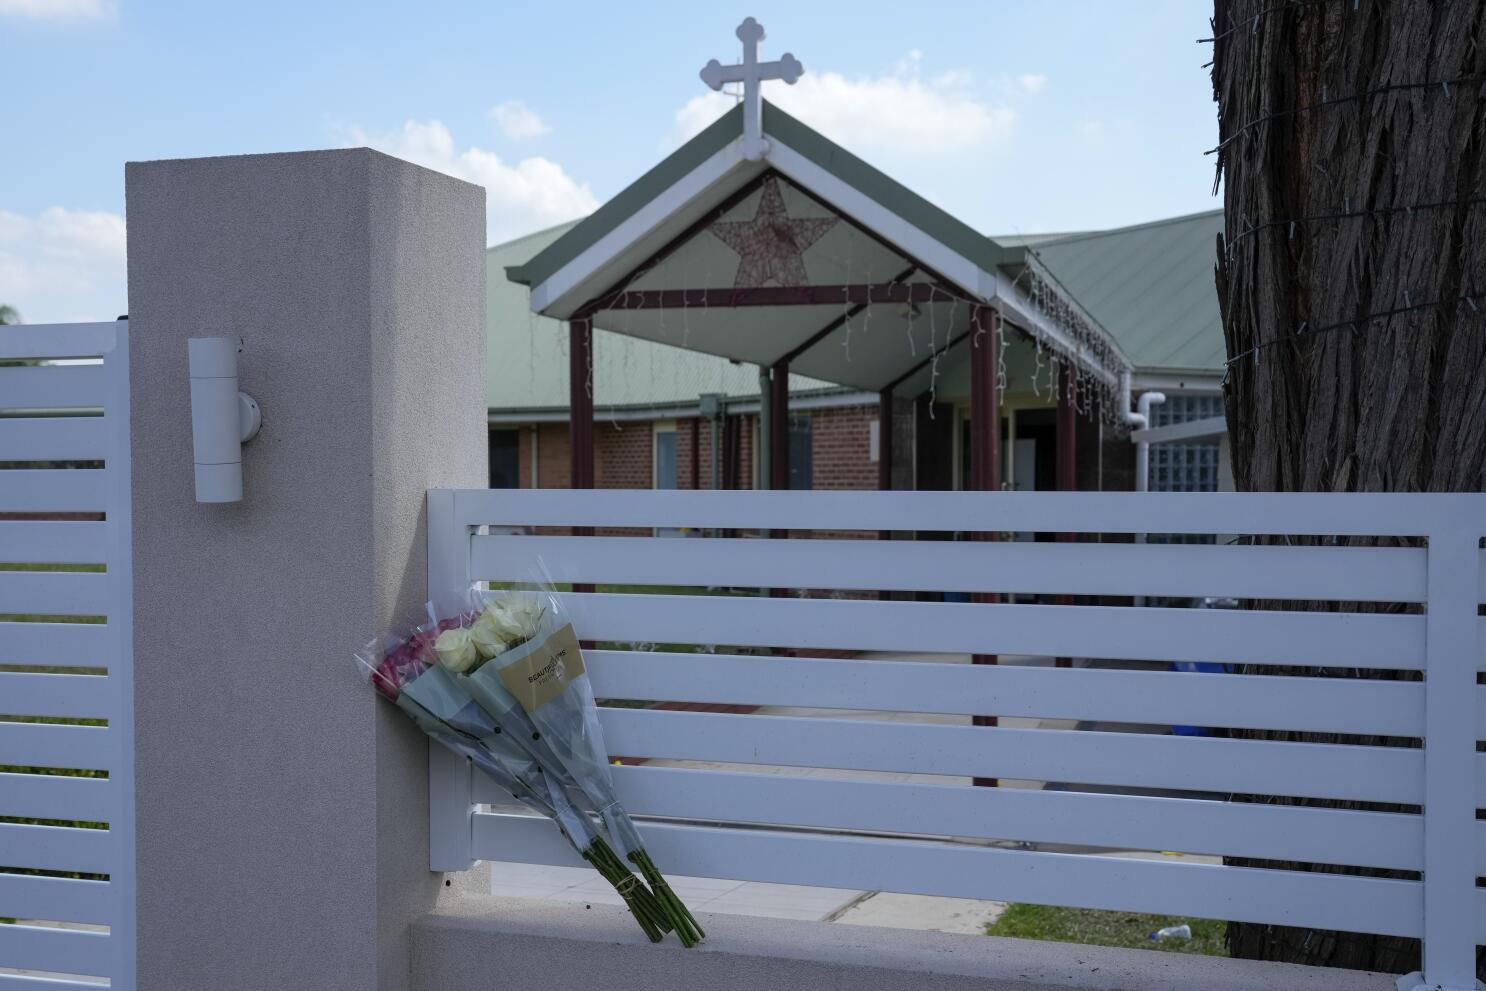 Judge denies bail to teen charged with terror-related offenses after stabbings at Sydney church 